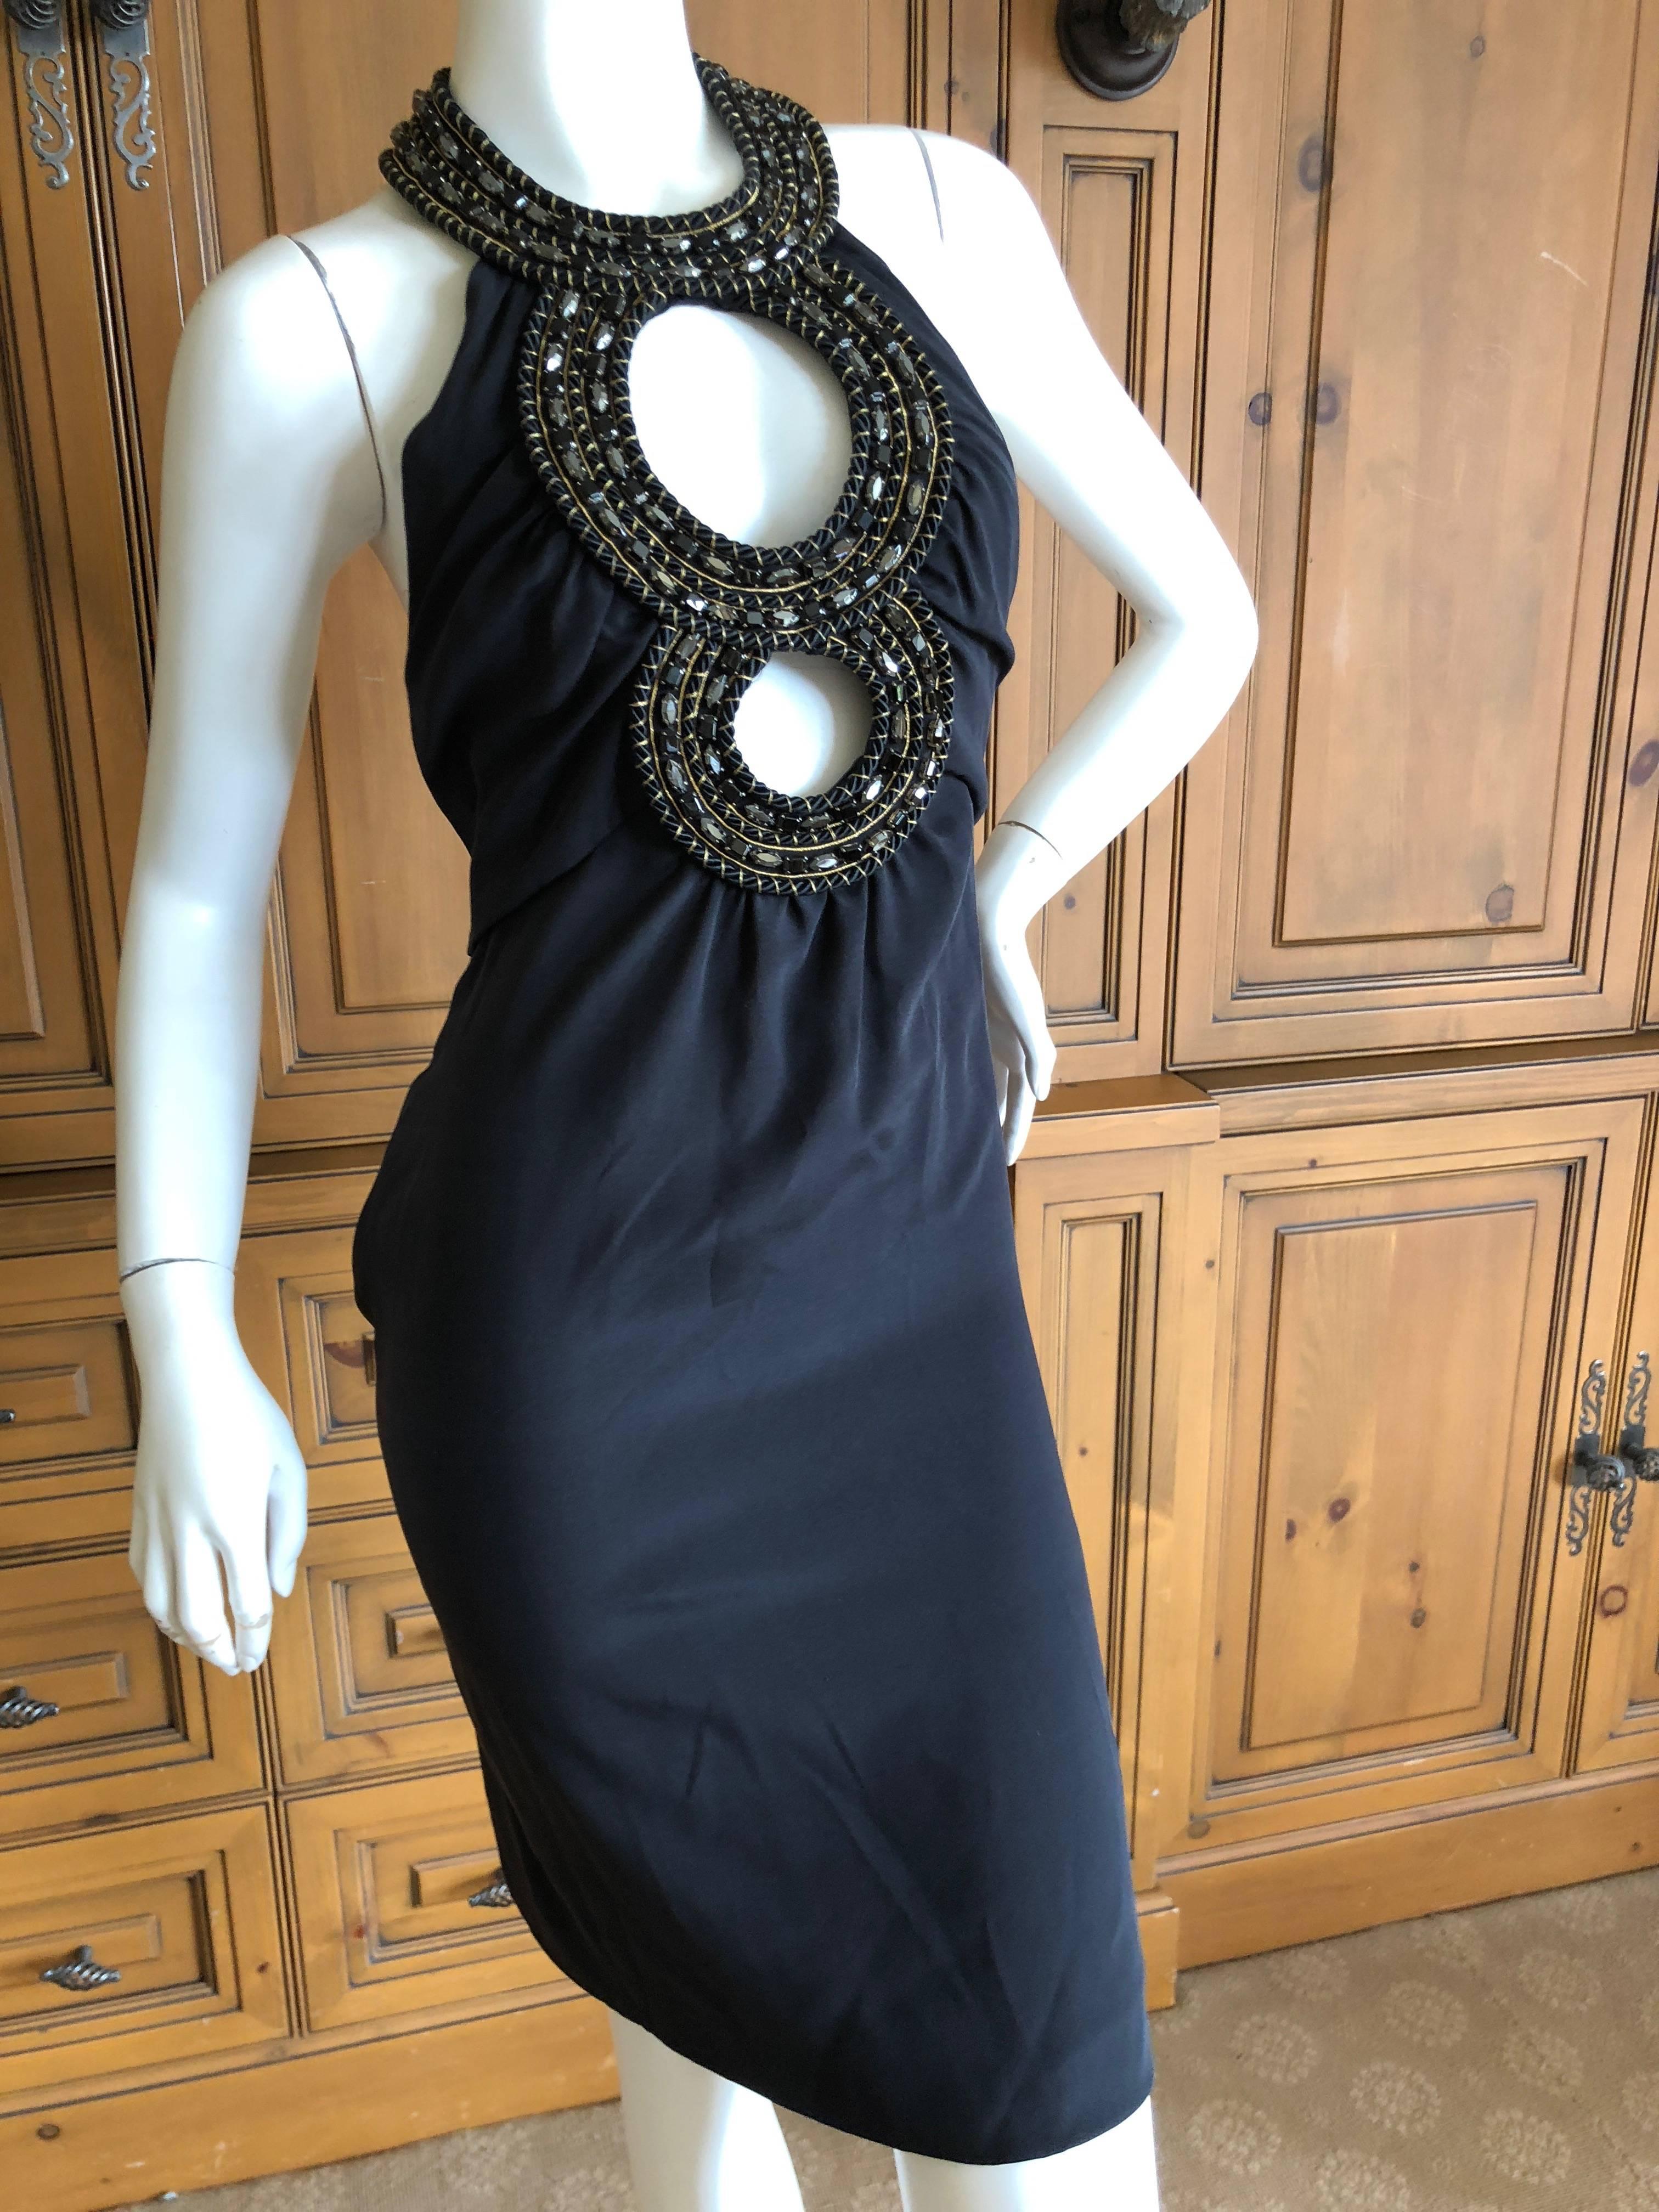 Azzaro Iconic Keyhole Backless Dress with Crystal and Cording Details
This is such a pretty piece. 
No size tag appx size 38 Eu
Bust 36